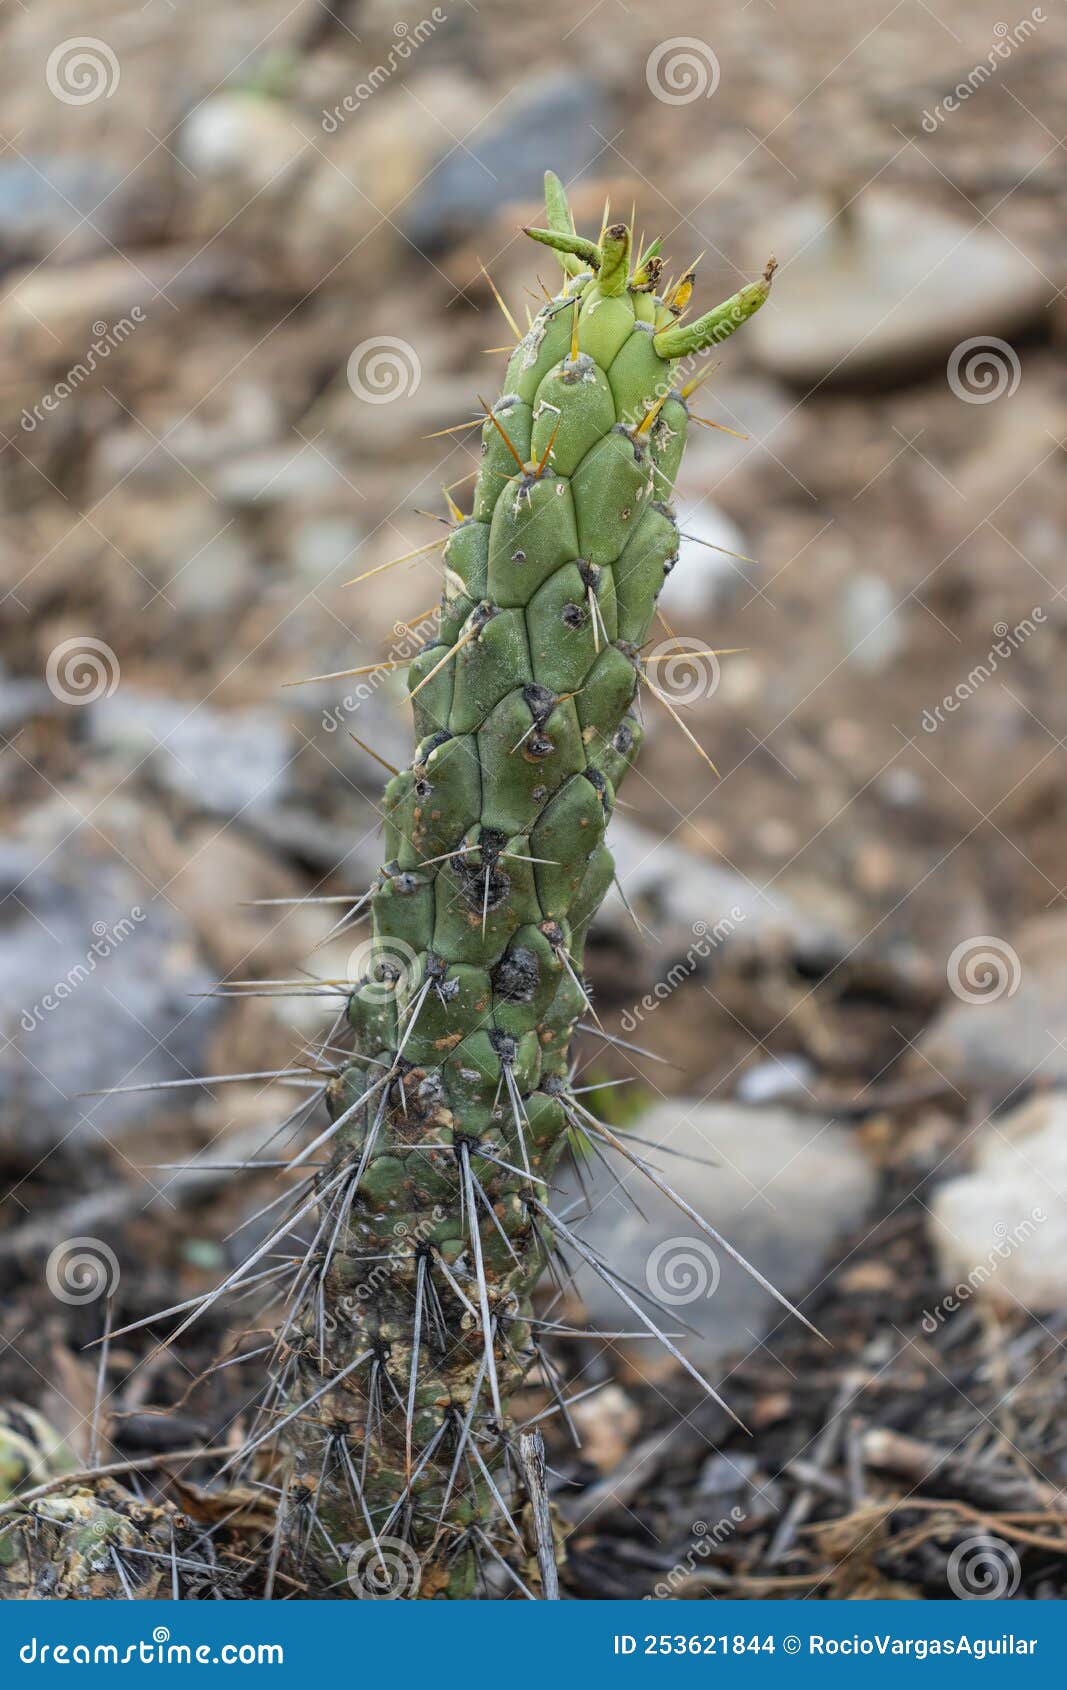 cactus plant known as palo de espinas or as species opuntia cylindrica (lam.) dc. belongs to the plant family cactaceae.